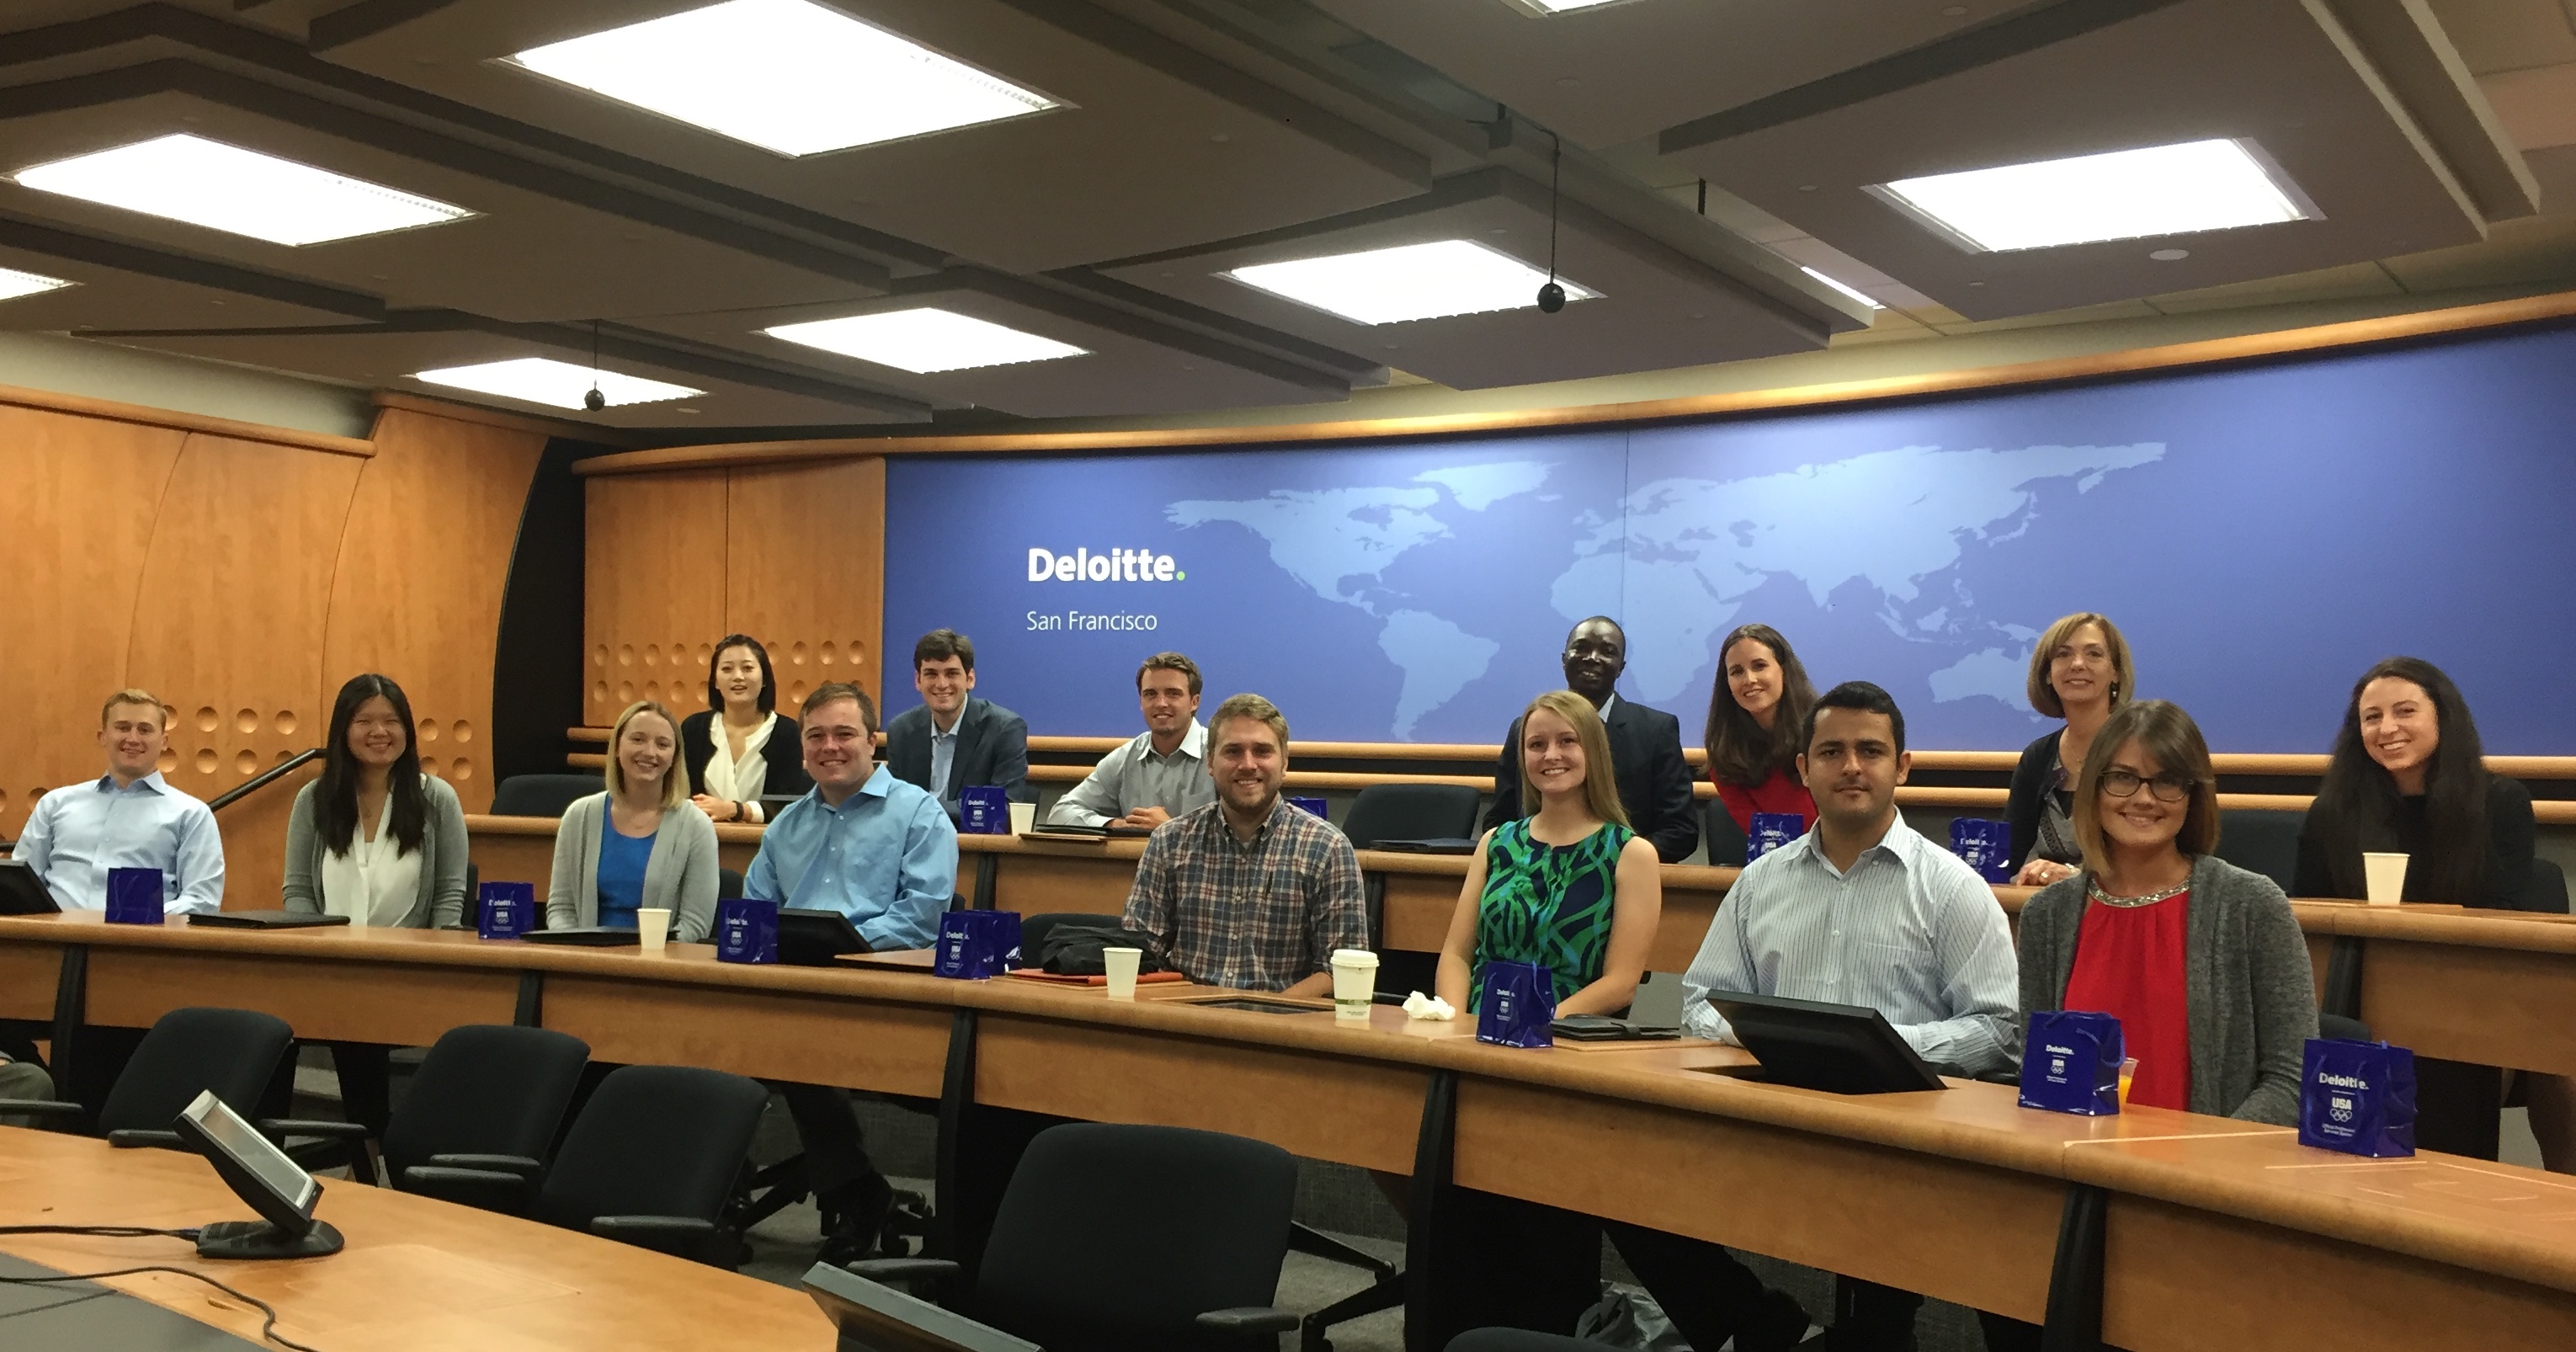 Students tour the Deloitte corporate offices during the 2016 XPlore West Coast trip to San Francisco.